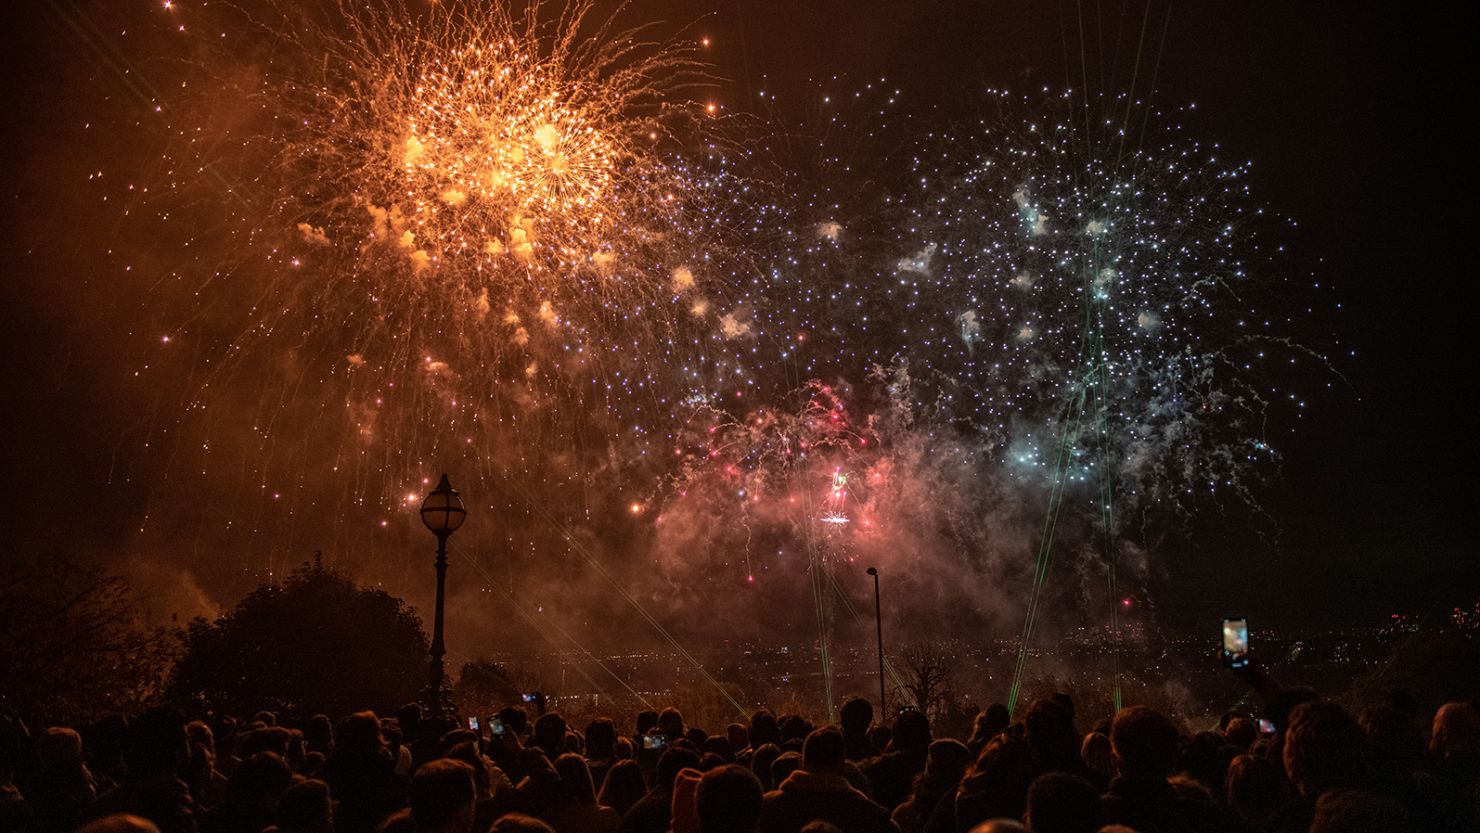 Every year on November 5, skies across England, Scotland and Wales are illuminated by fireworks as Brits head out into the night to enjoy Guy Fawkes Night celebrations.